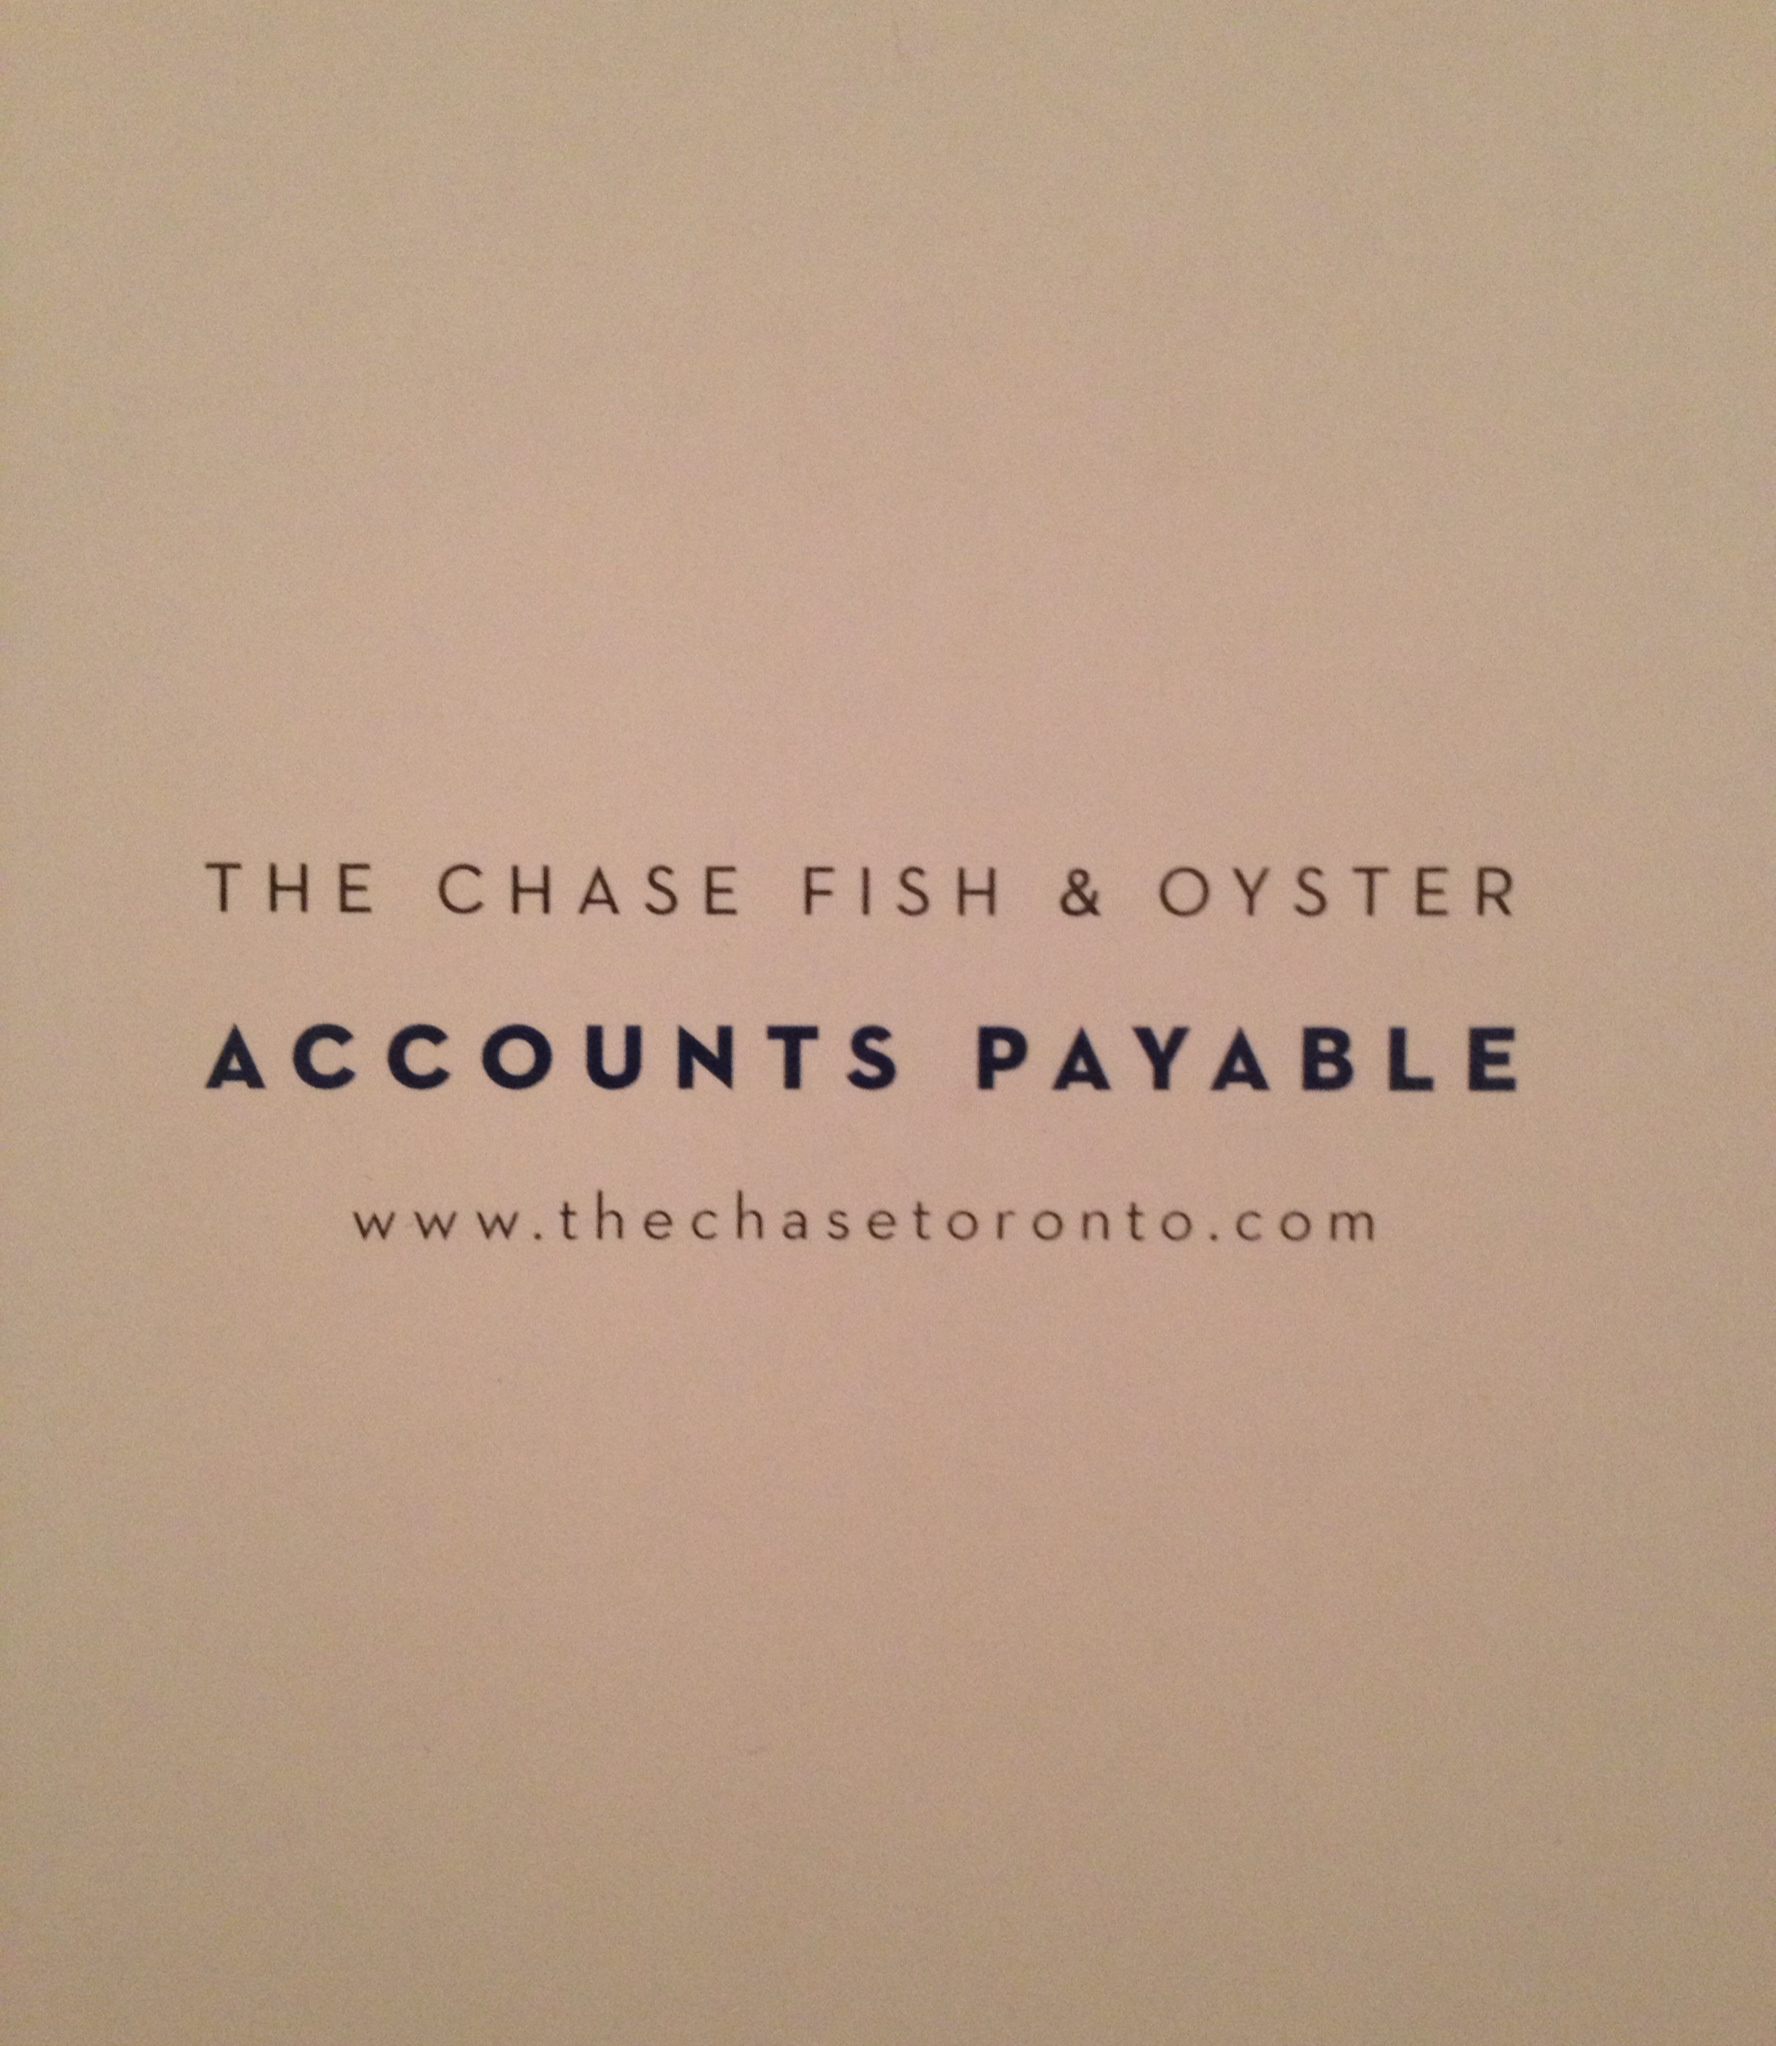 The Chase Accounts Payable